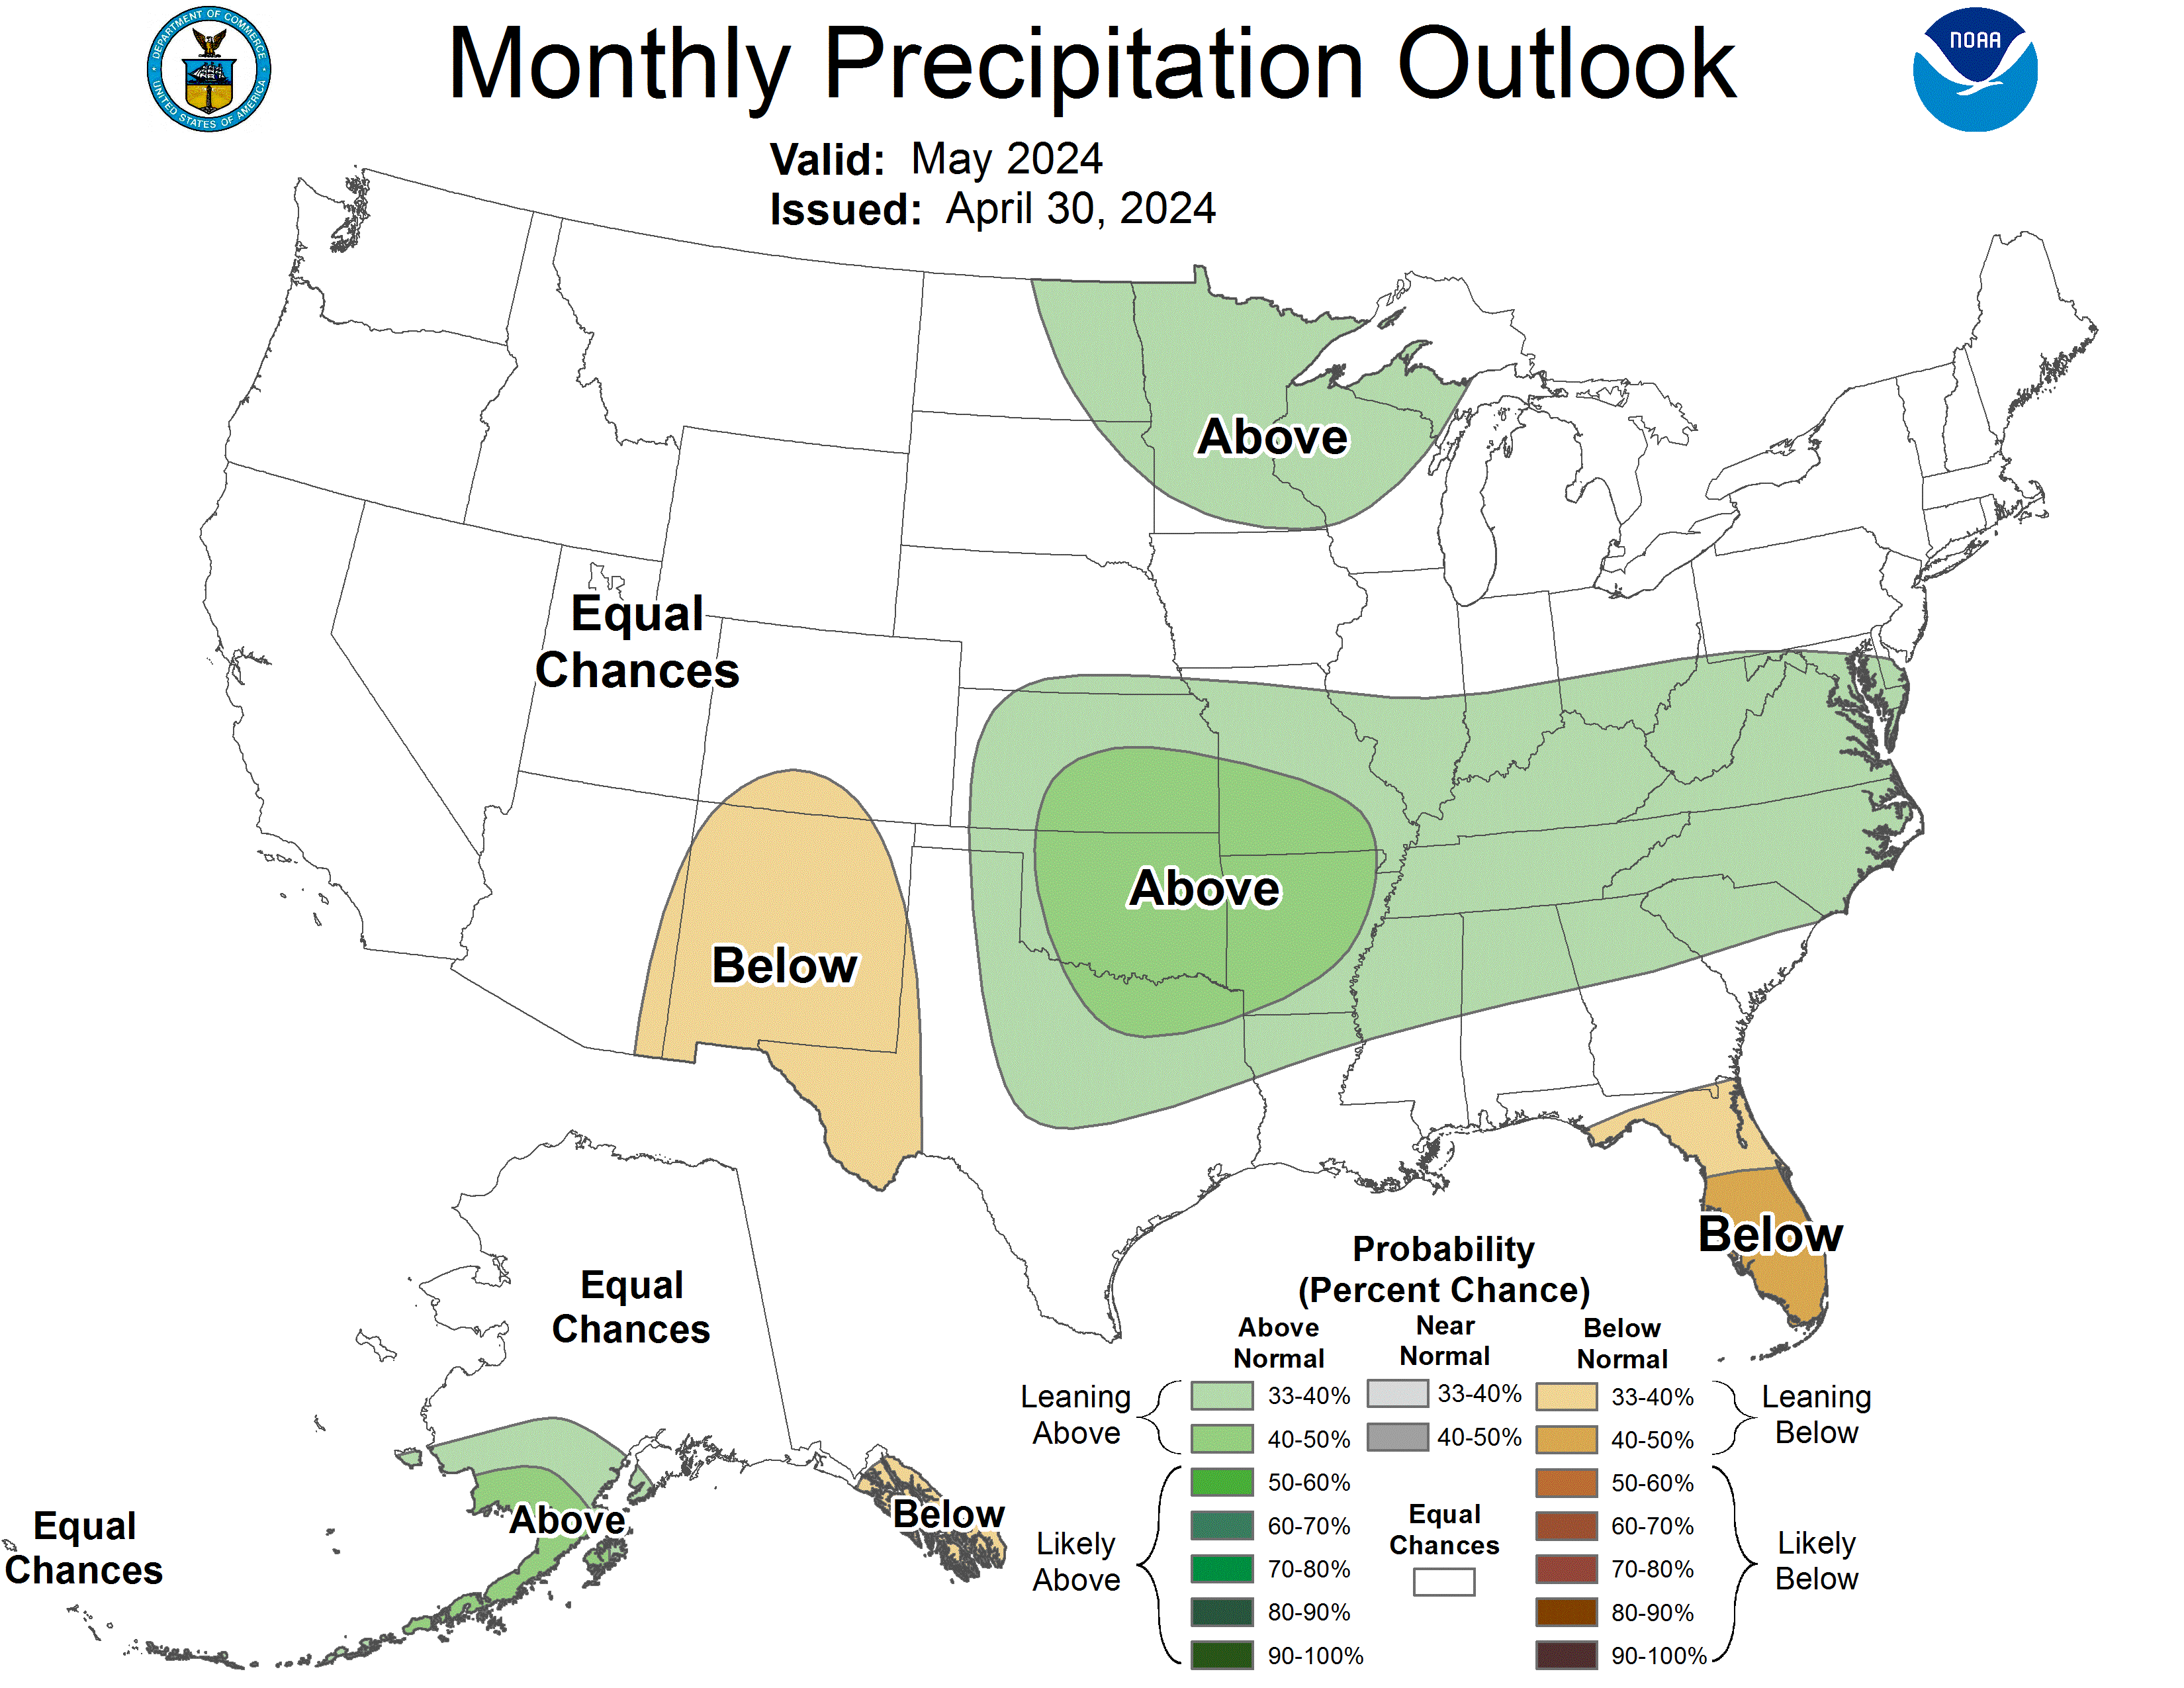 One month outlook precipitation probability